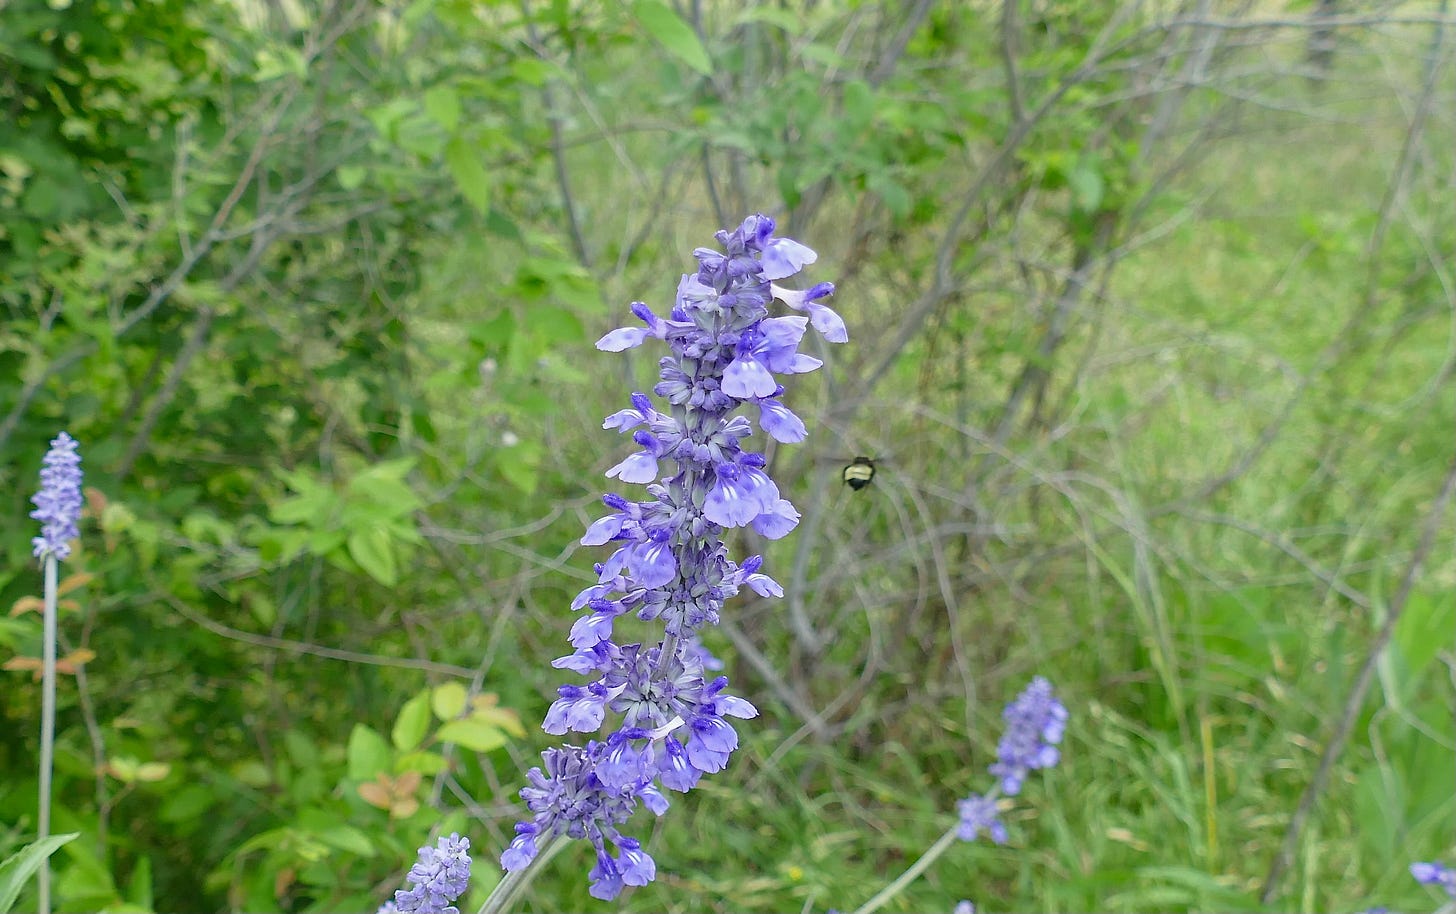 Blue sage in bloom, with bumblebee